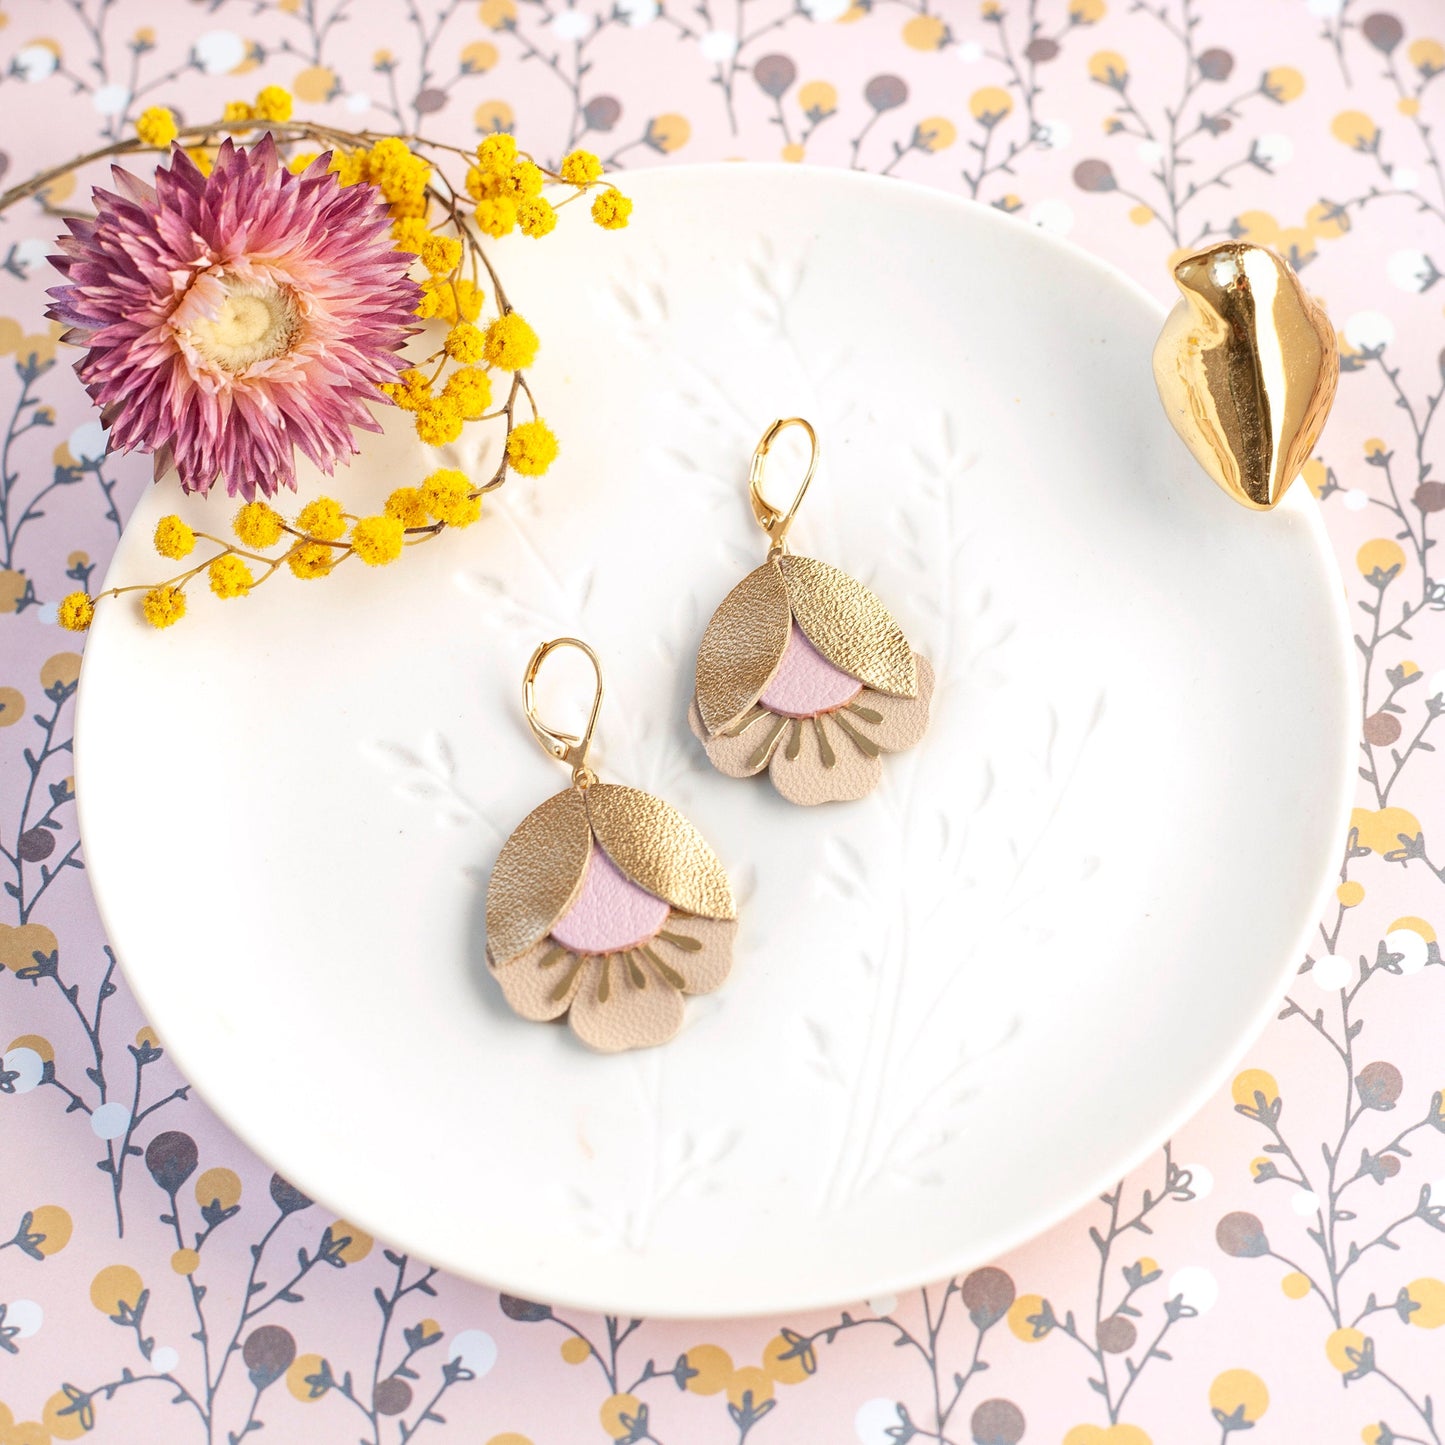 Cherry blossom earrings in pink gold beige leather